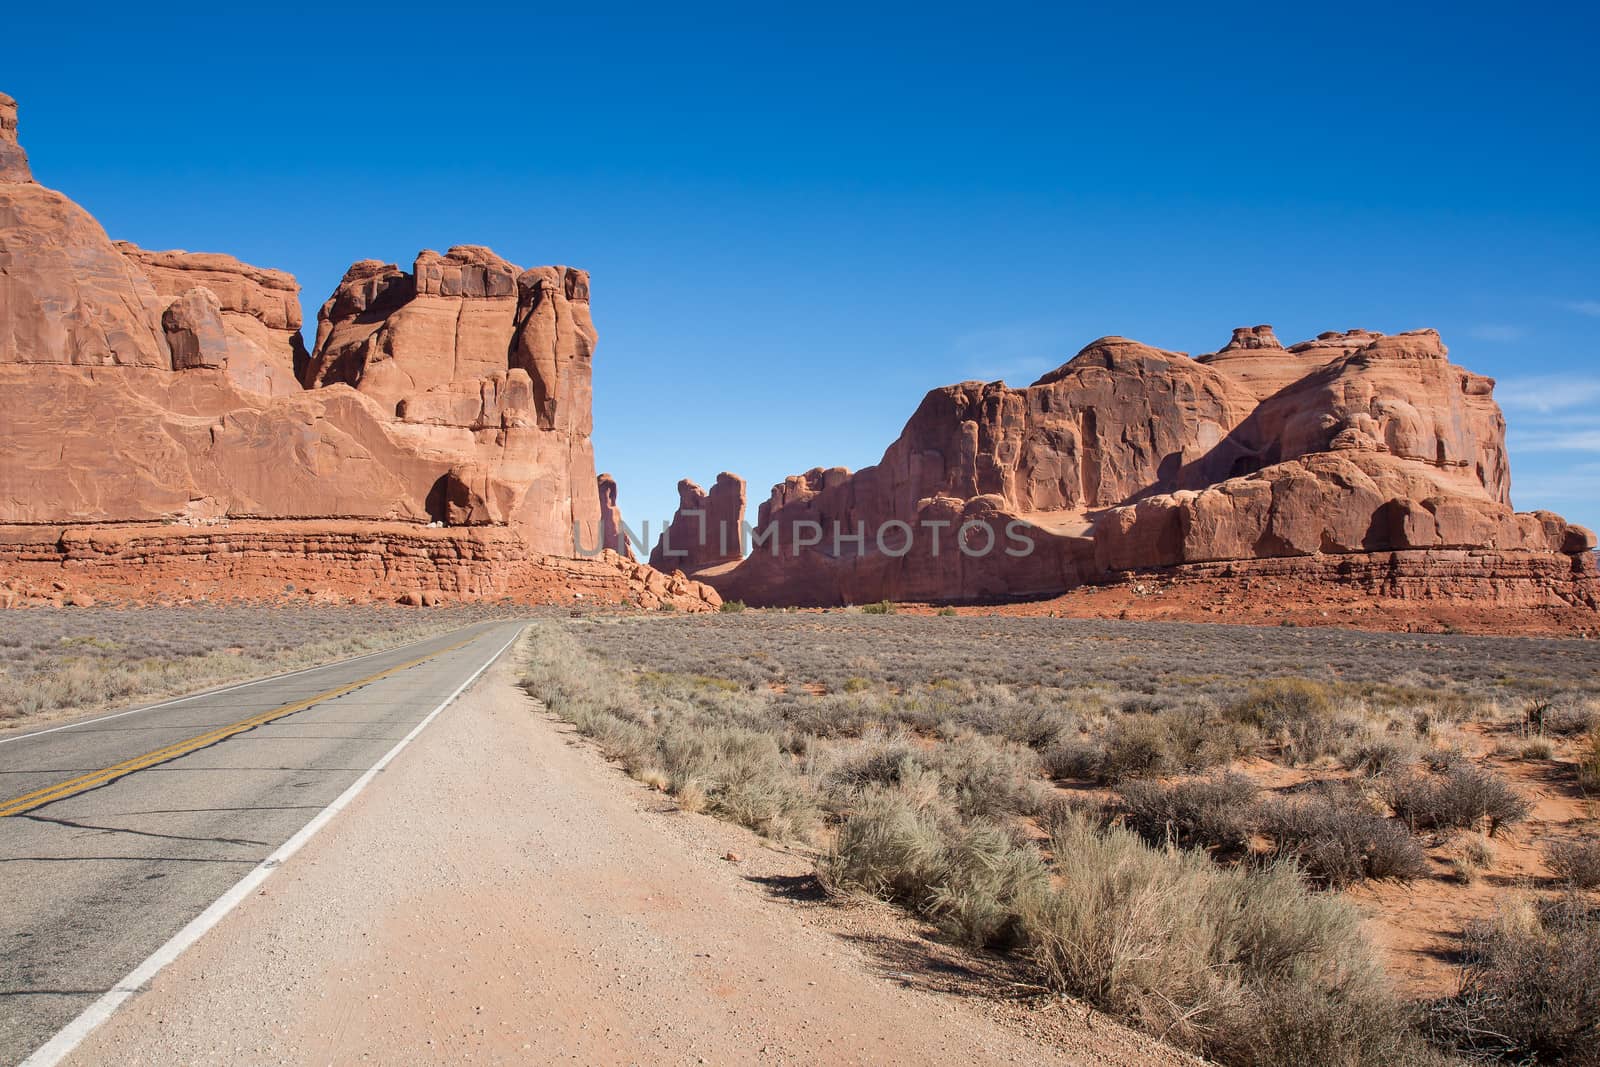 Approach to Arches National Park by picturyay